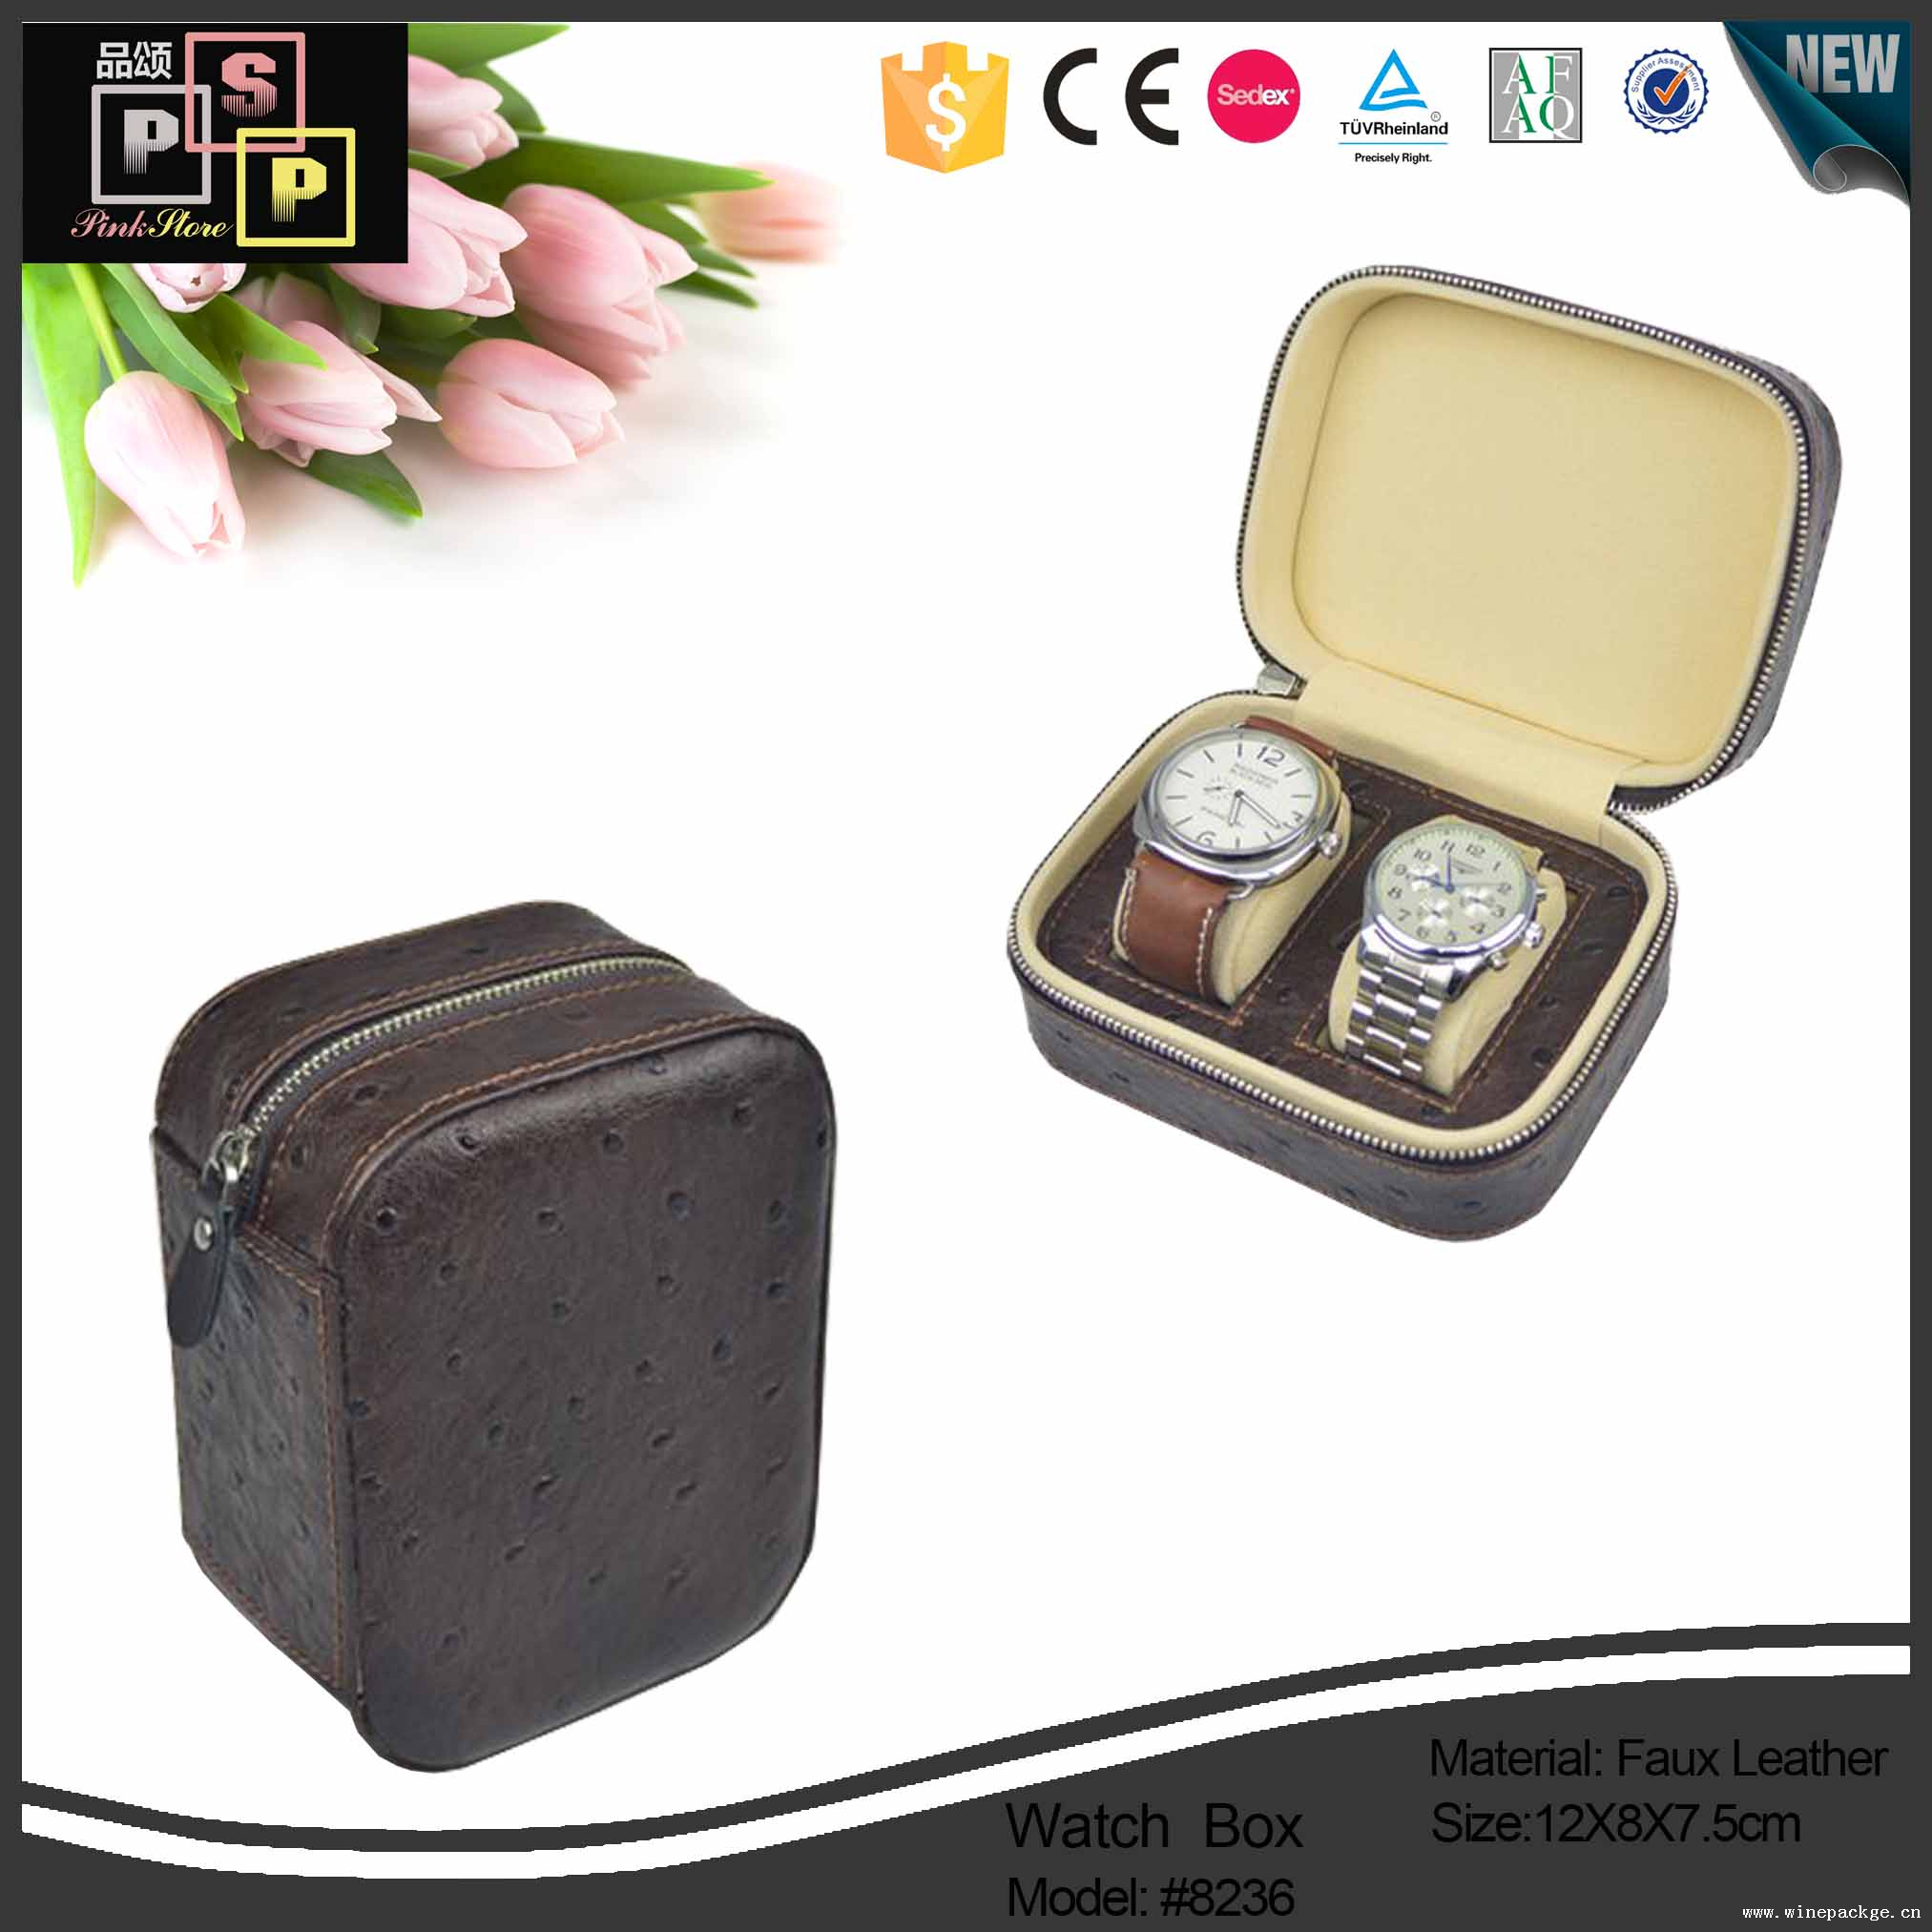 PU Leather Material and Stamping,Embossing, Printing leather watch box